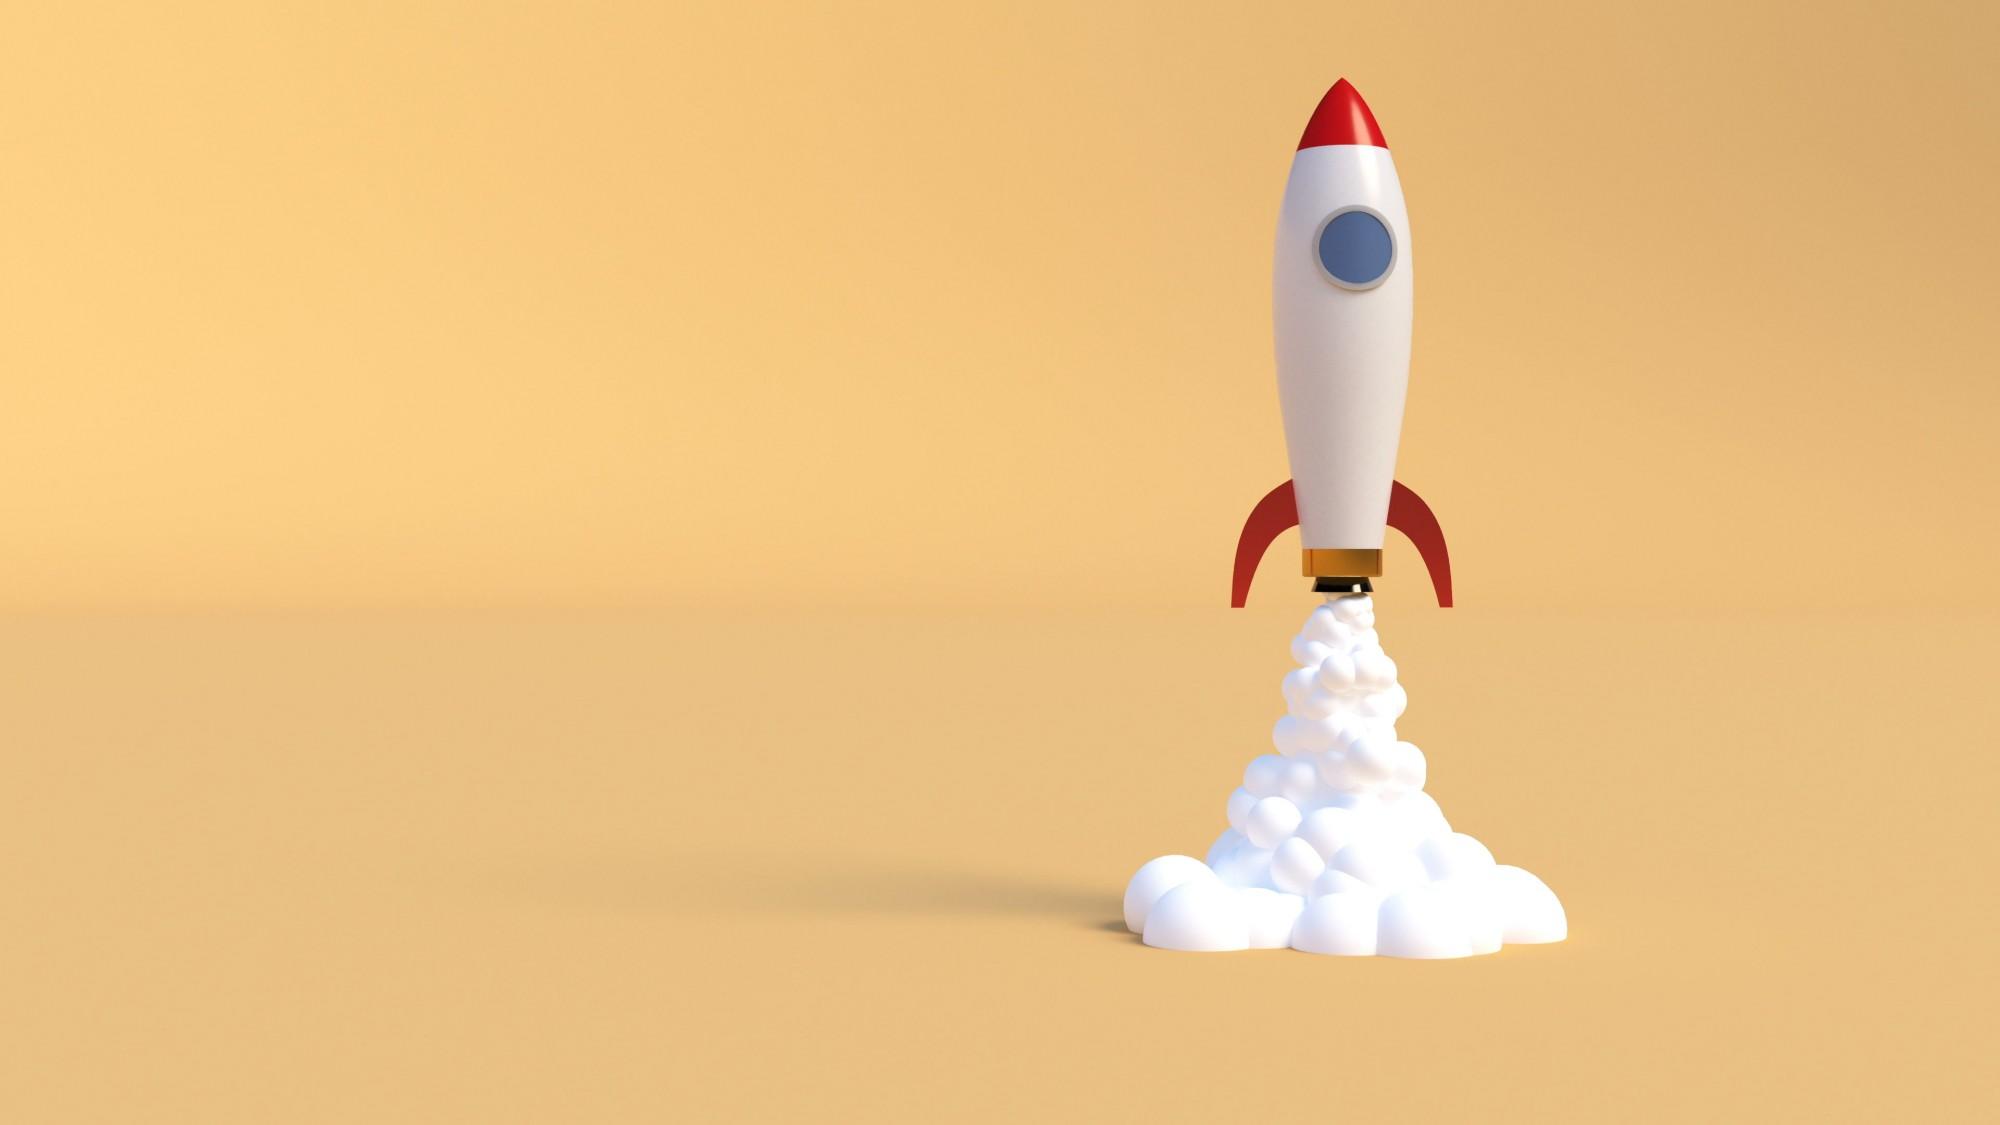 Illustration of a rocket taking flight on a yellow background